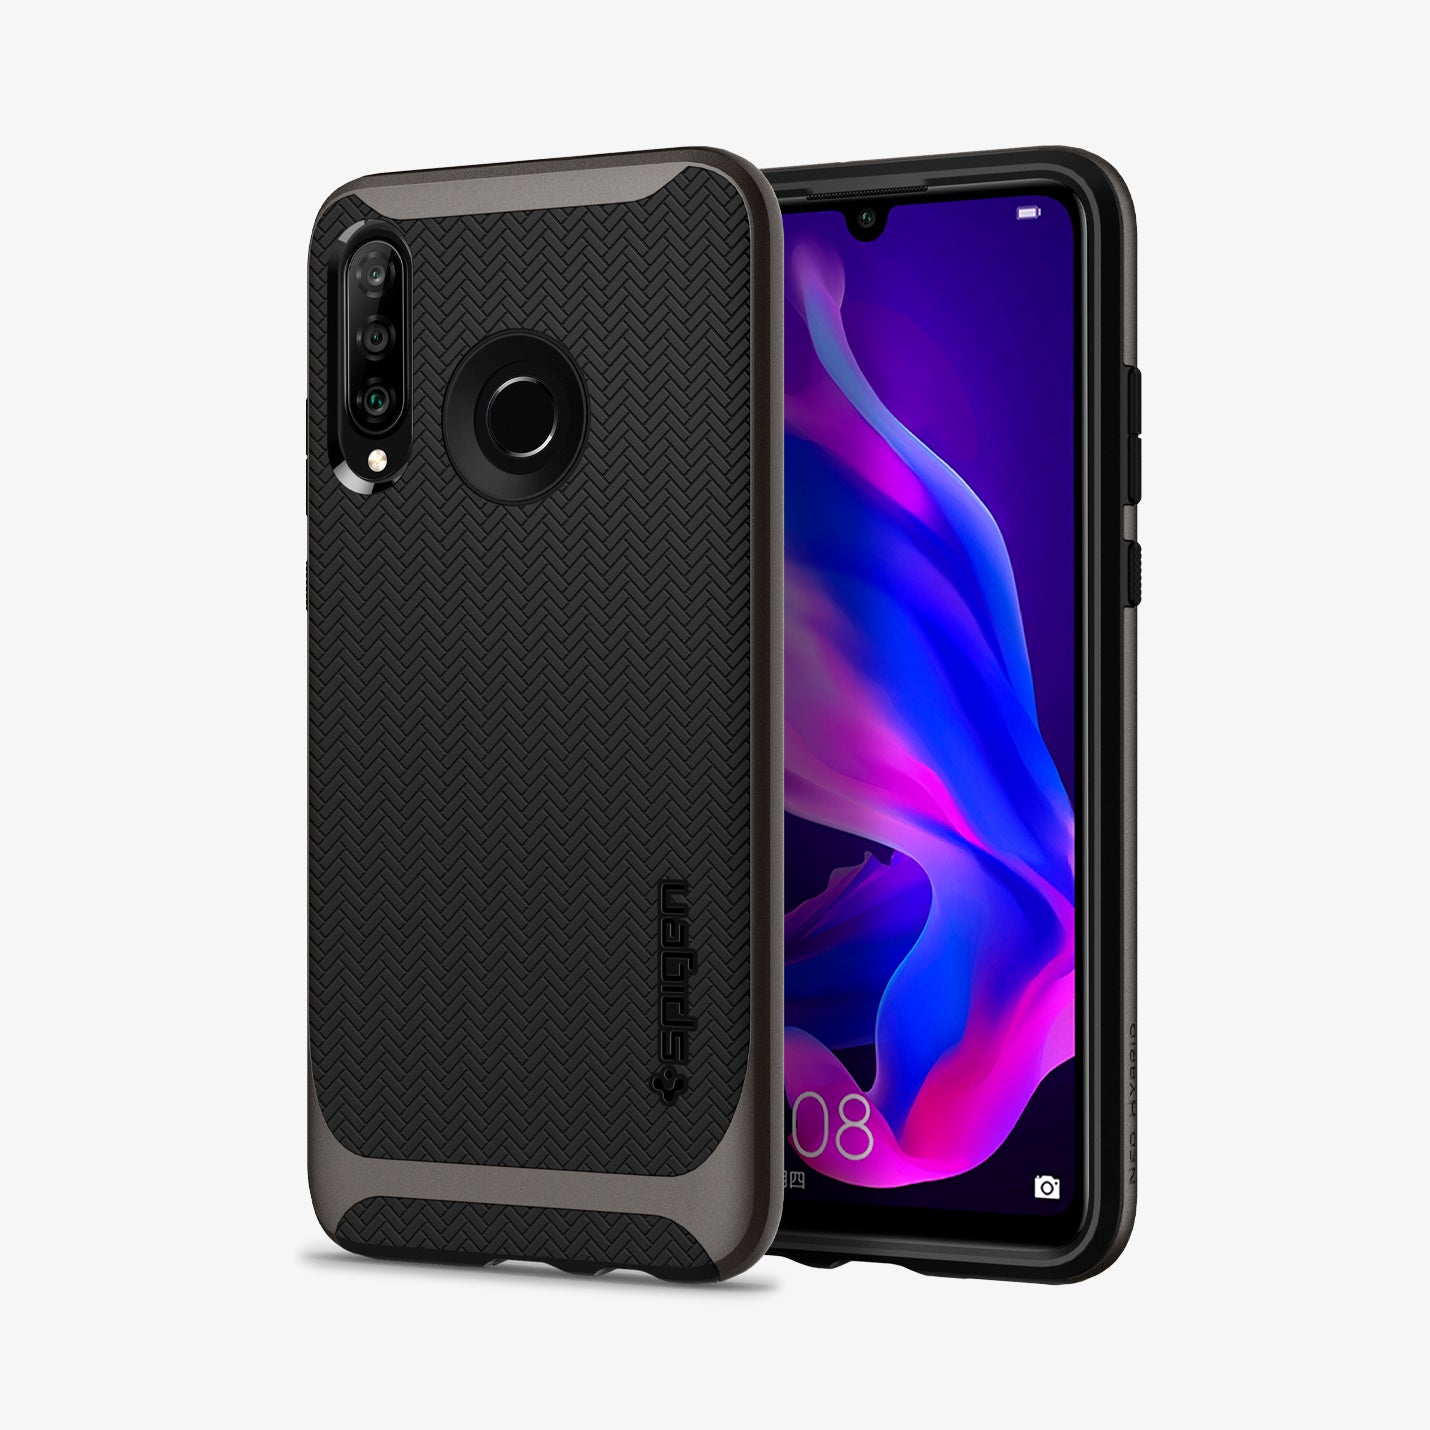 L39CS25742 - Huawei P30 Lite / Nova 4e Neo Hybrid Case in gunmetal showing the back and front